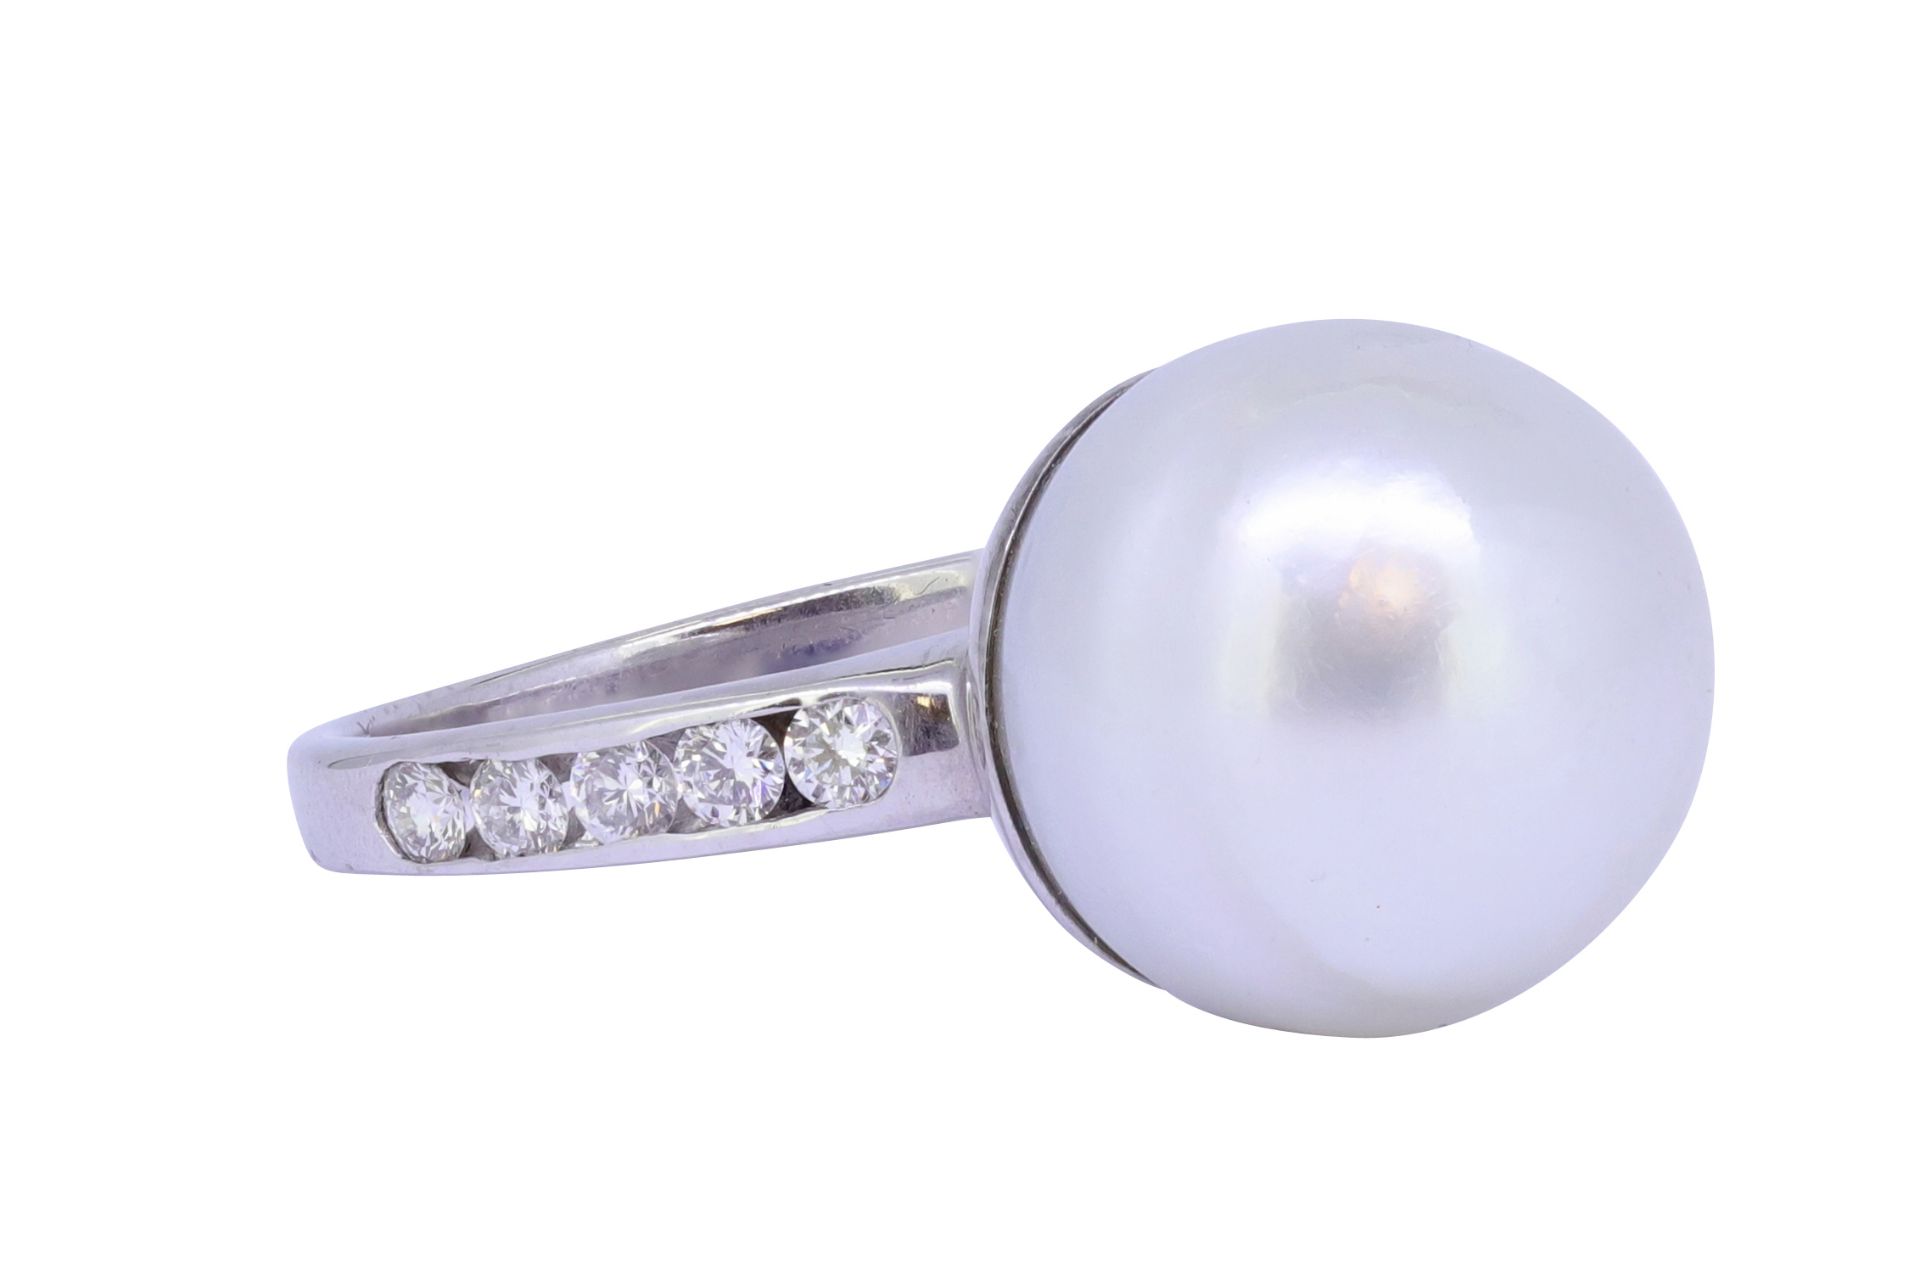 PEARL AND DIAMOND RING